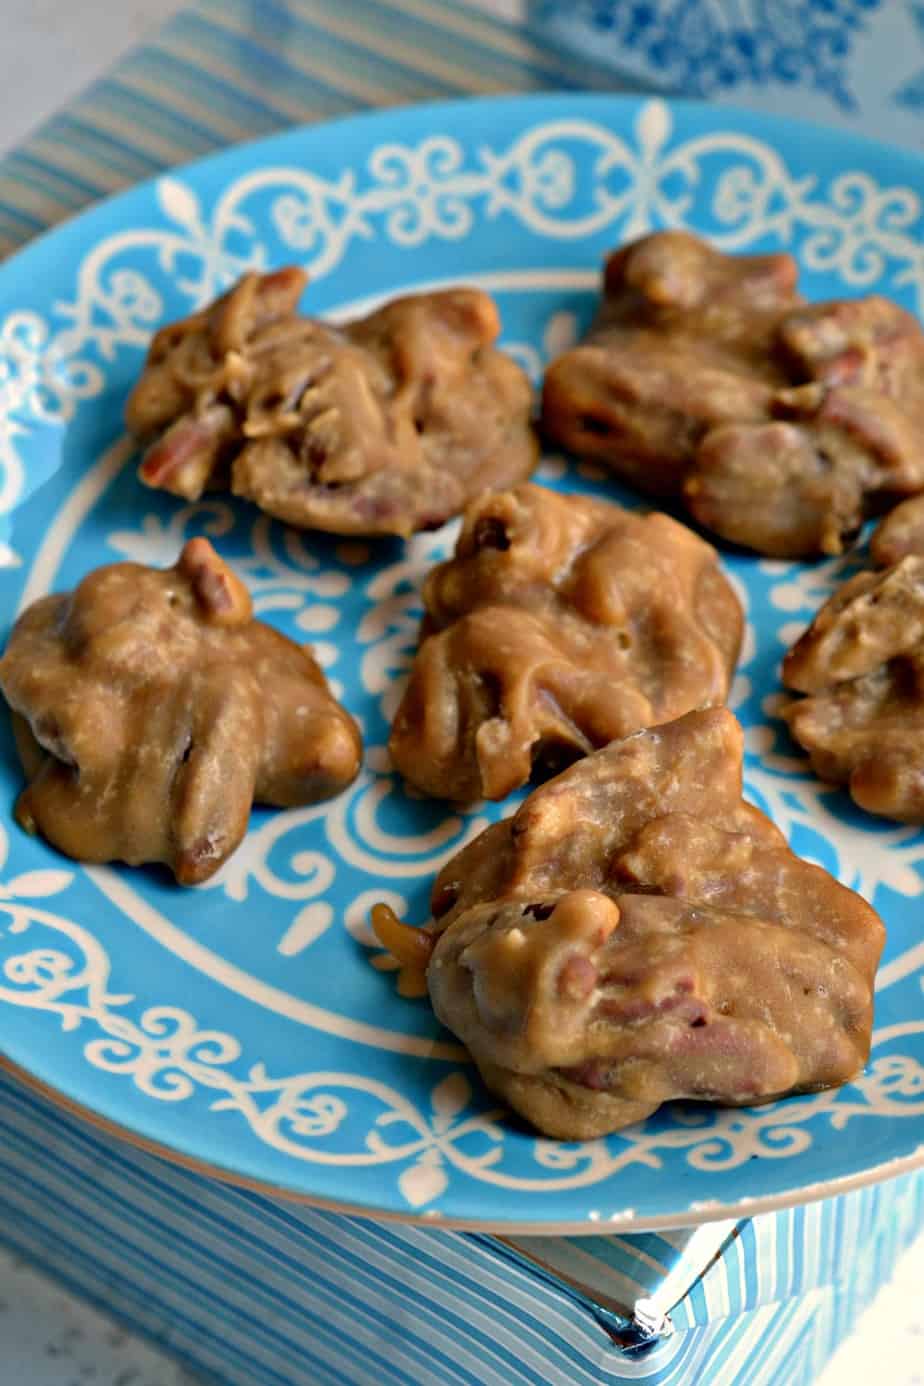 How to make Southern Pecan Pralines